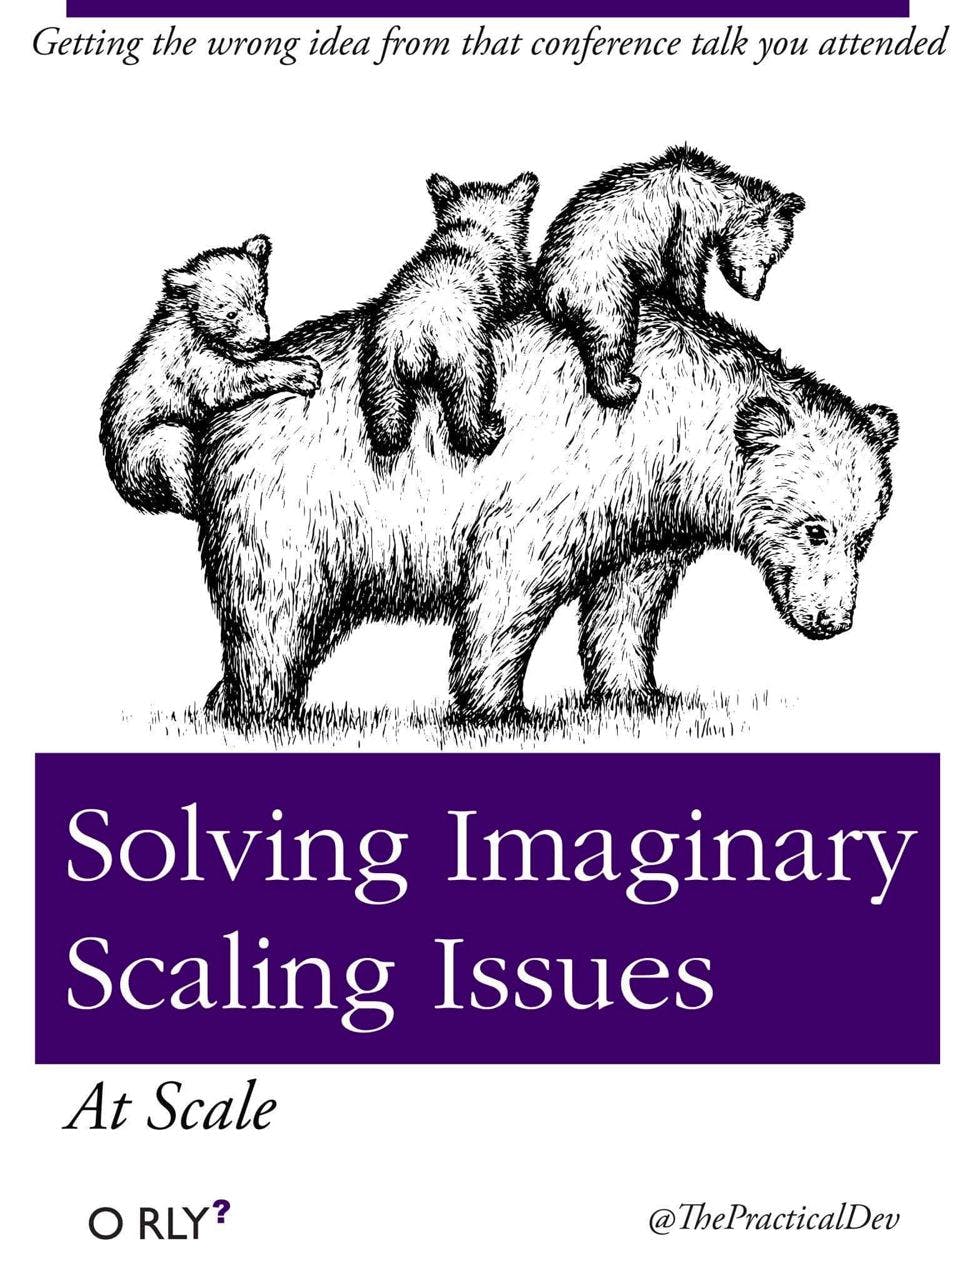 Solving Imaginary Scaling Issues | At Scale | Getting the wrong idea from that conference talk you attended